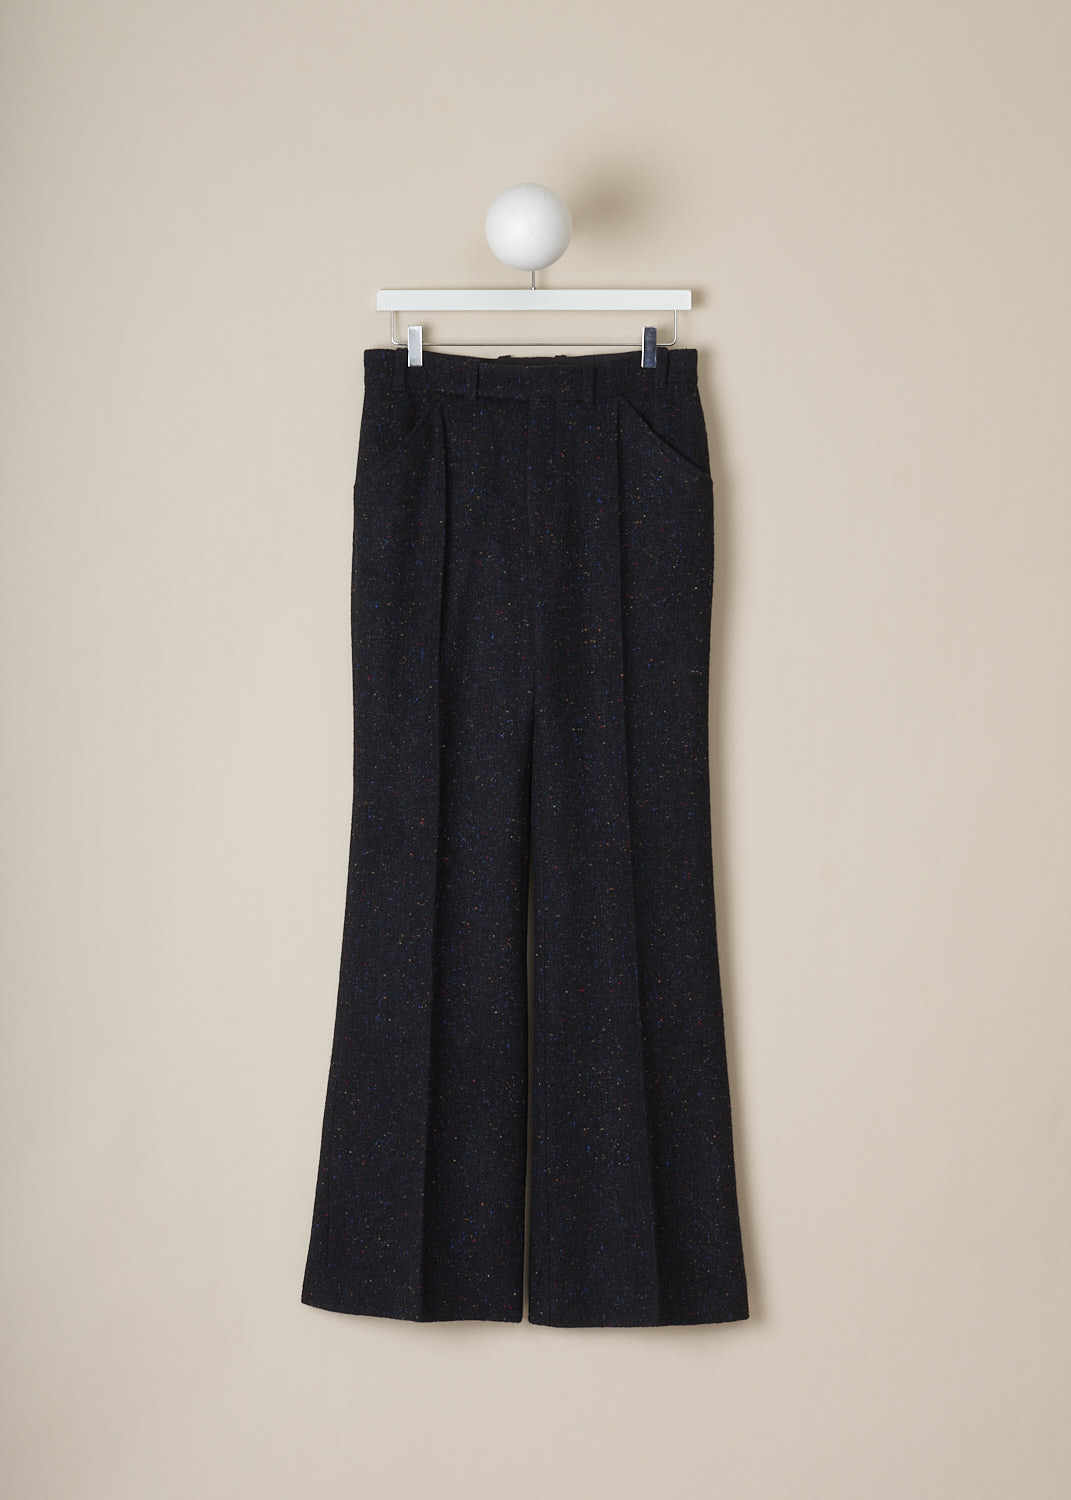 CHLOÃ‰, HIGH-WAISTED SPECKLED PANTS, CHC22APA141654D2_ANTHRACITE_BLUE, Blue, Grey, Print, Front, This high-waisted pants have an anthracite blue base color with multicolored speckles throughout. These pants have a narrow waistband with belt loops and a concealed zip closure. These pants have slanted pocket sin the front and welt pockets in the back. The flared pant legs have centre creases along the front and back. 
